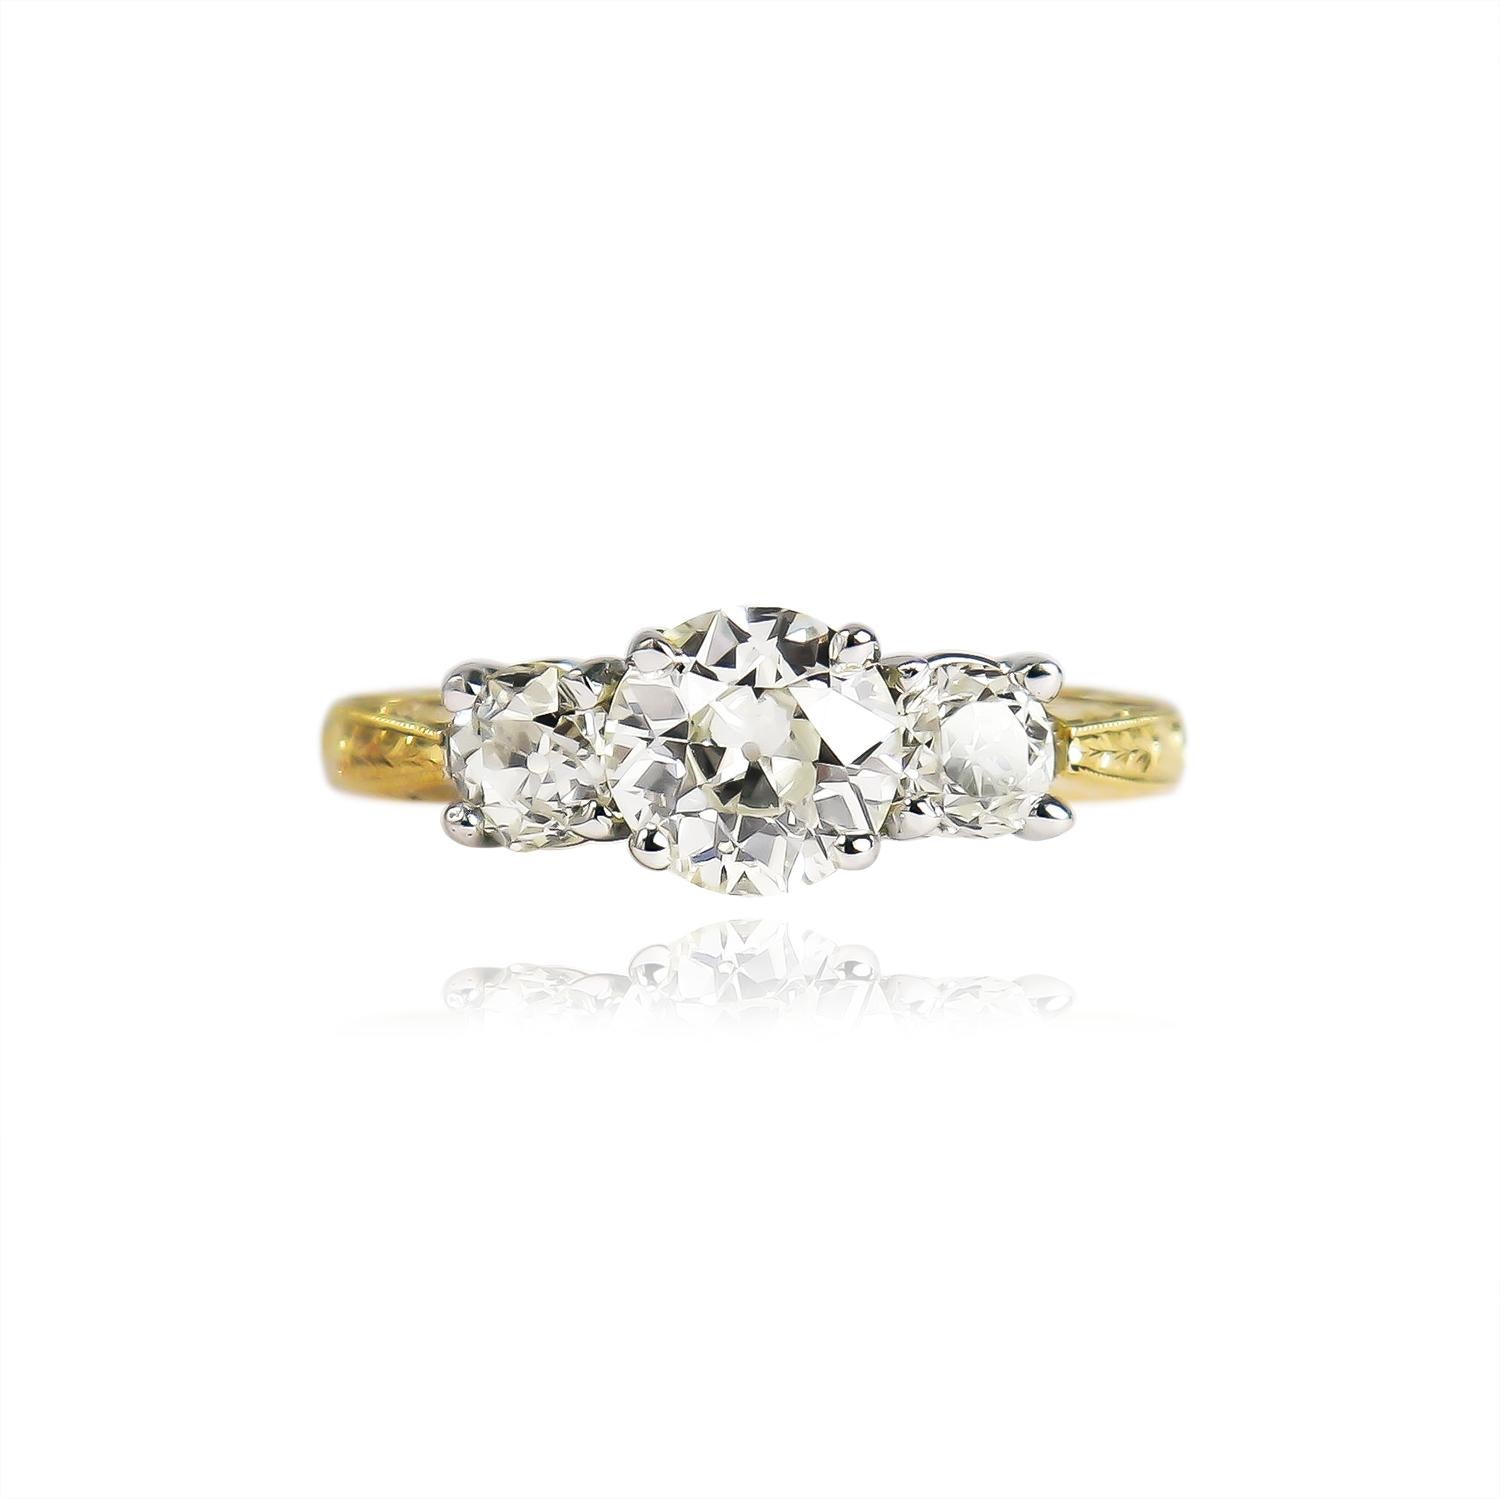 This charming, three-stone ring from the J. Birnbach vault features three Old European cut diamonds of L color and SI clarity = 1.44 carat total weight. Set in a 14K white and yellow gold mounting with engraved details throughout the shank, this